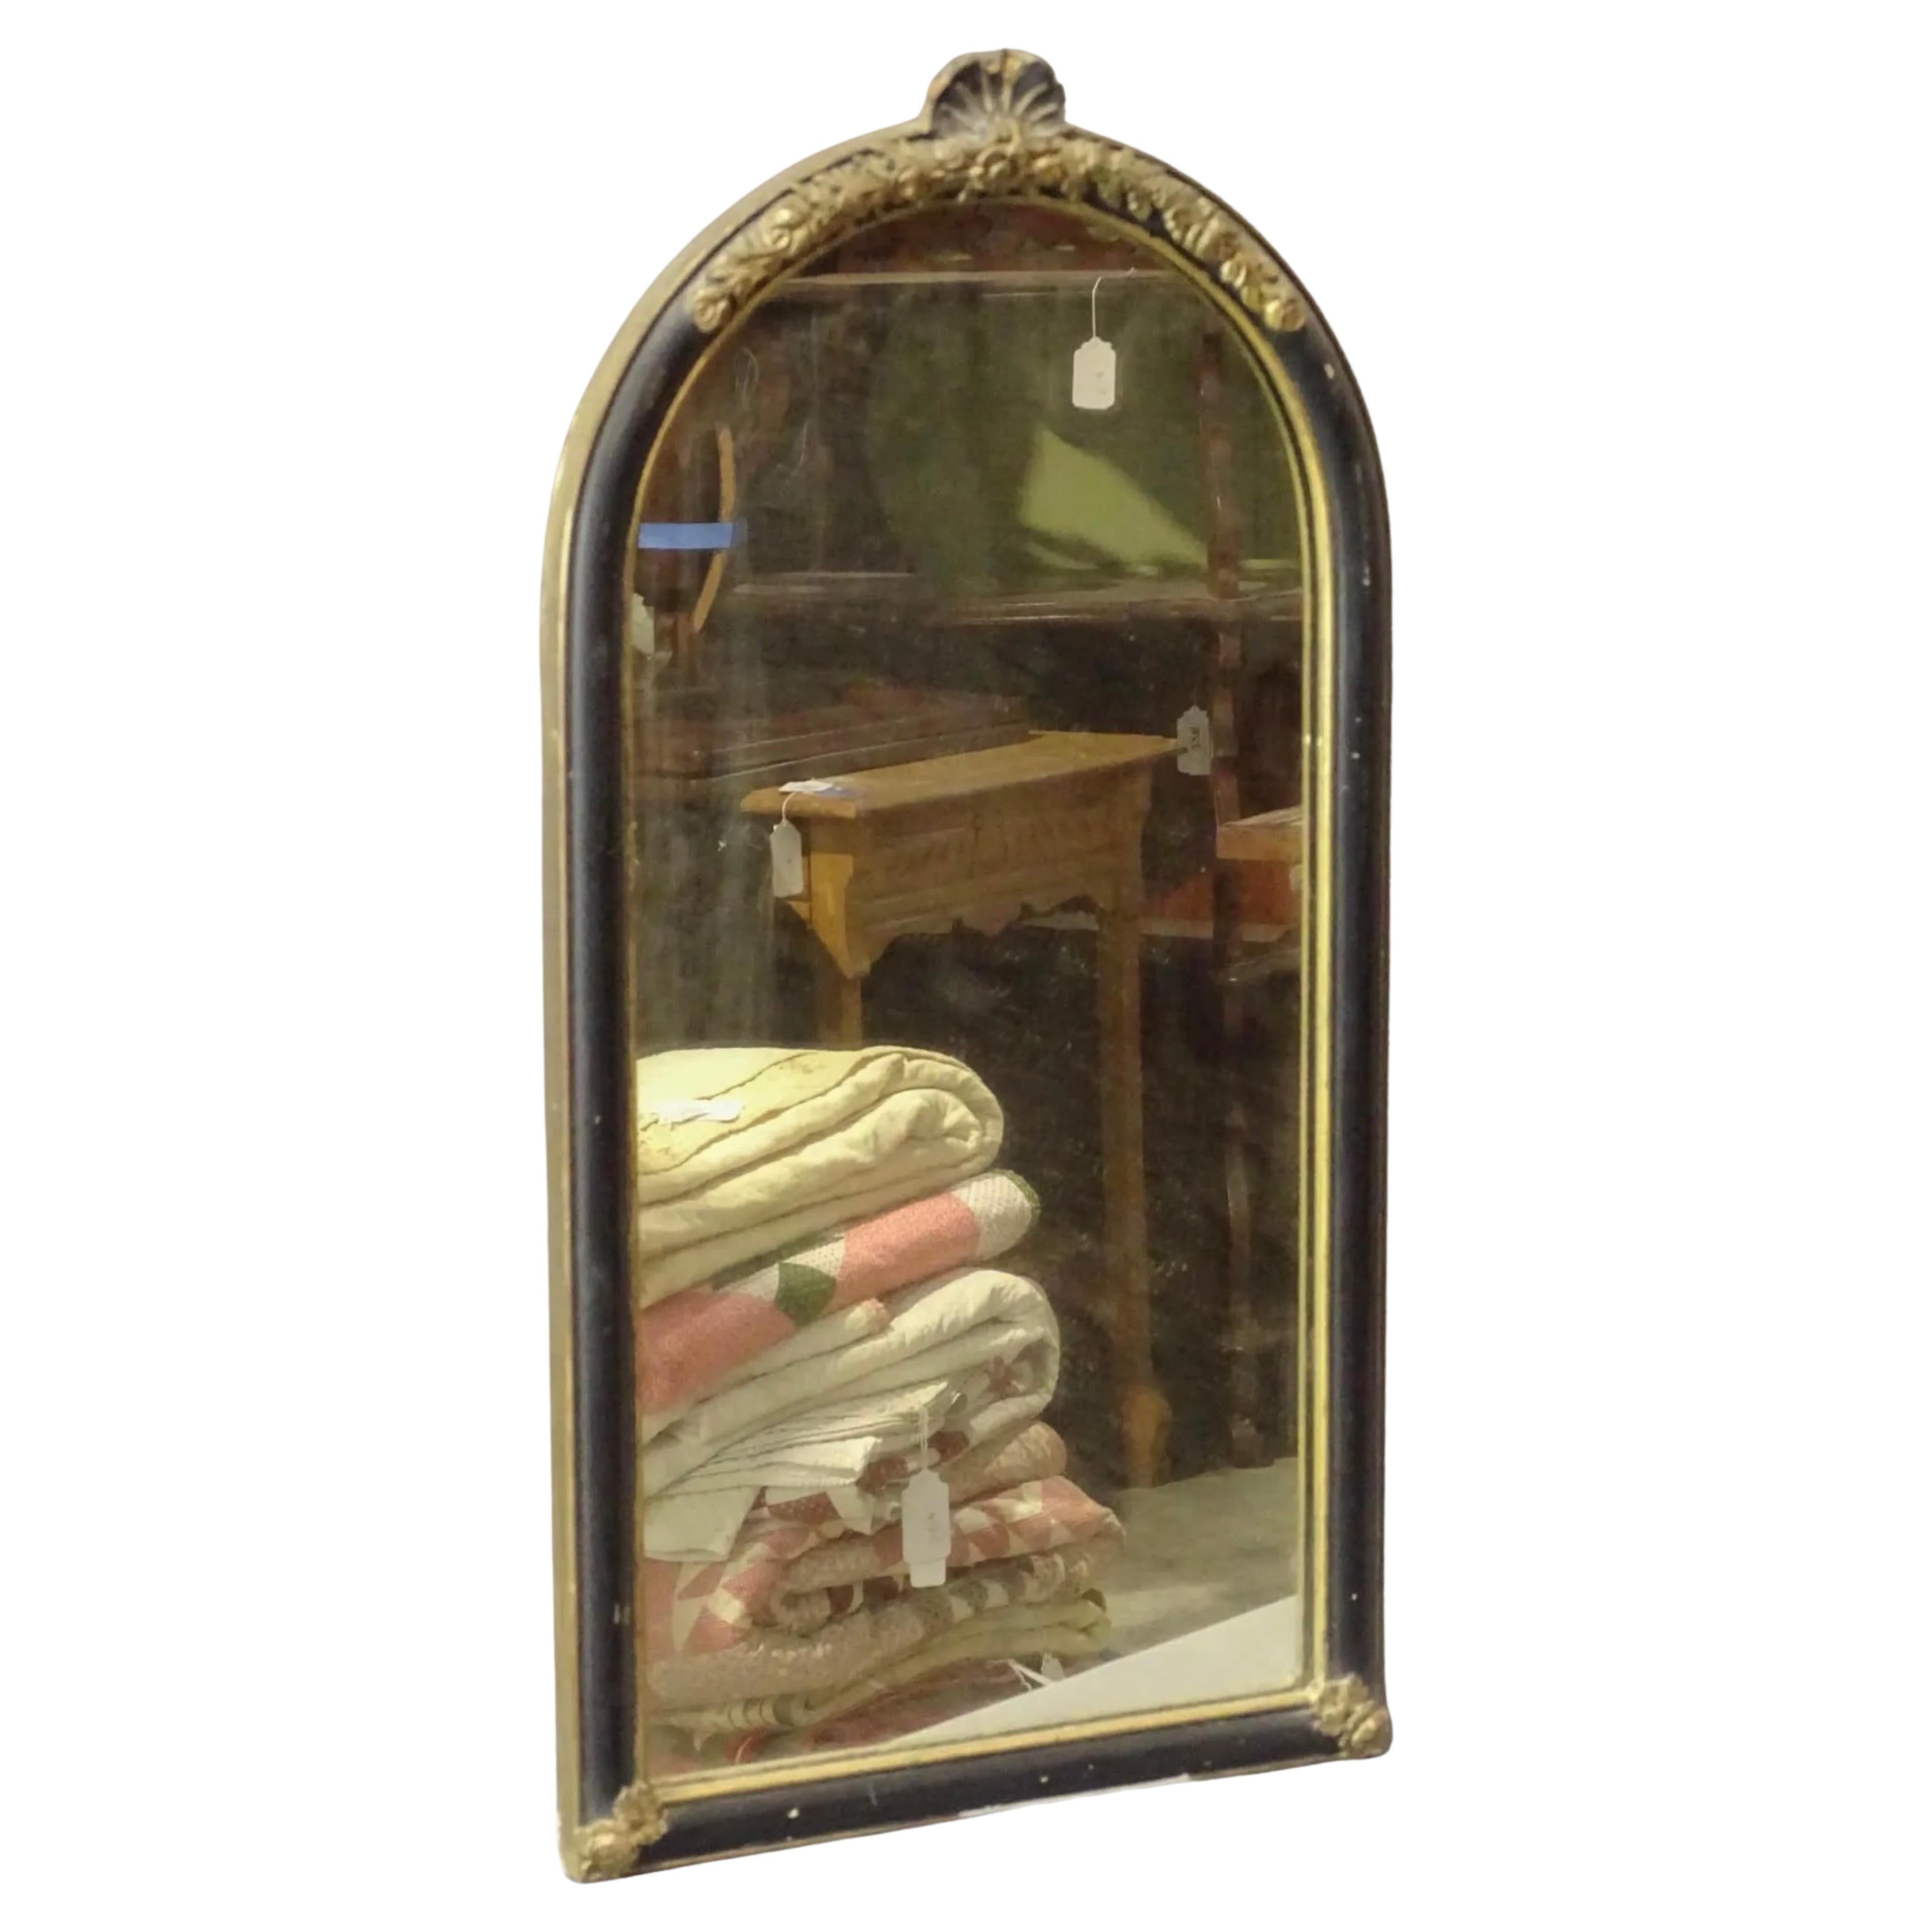 A small continental Queen Anne style mirror with ebonized frame, gold gilt shell decoration on the oval top and gold trim accent that surrounds the frame.
This smaller size mirror lends itself for a powder room mirror, vanity mirror or any where a